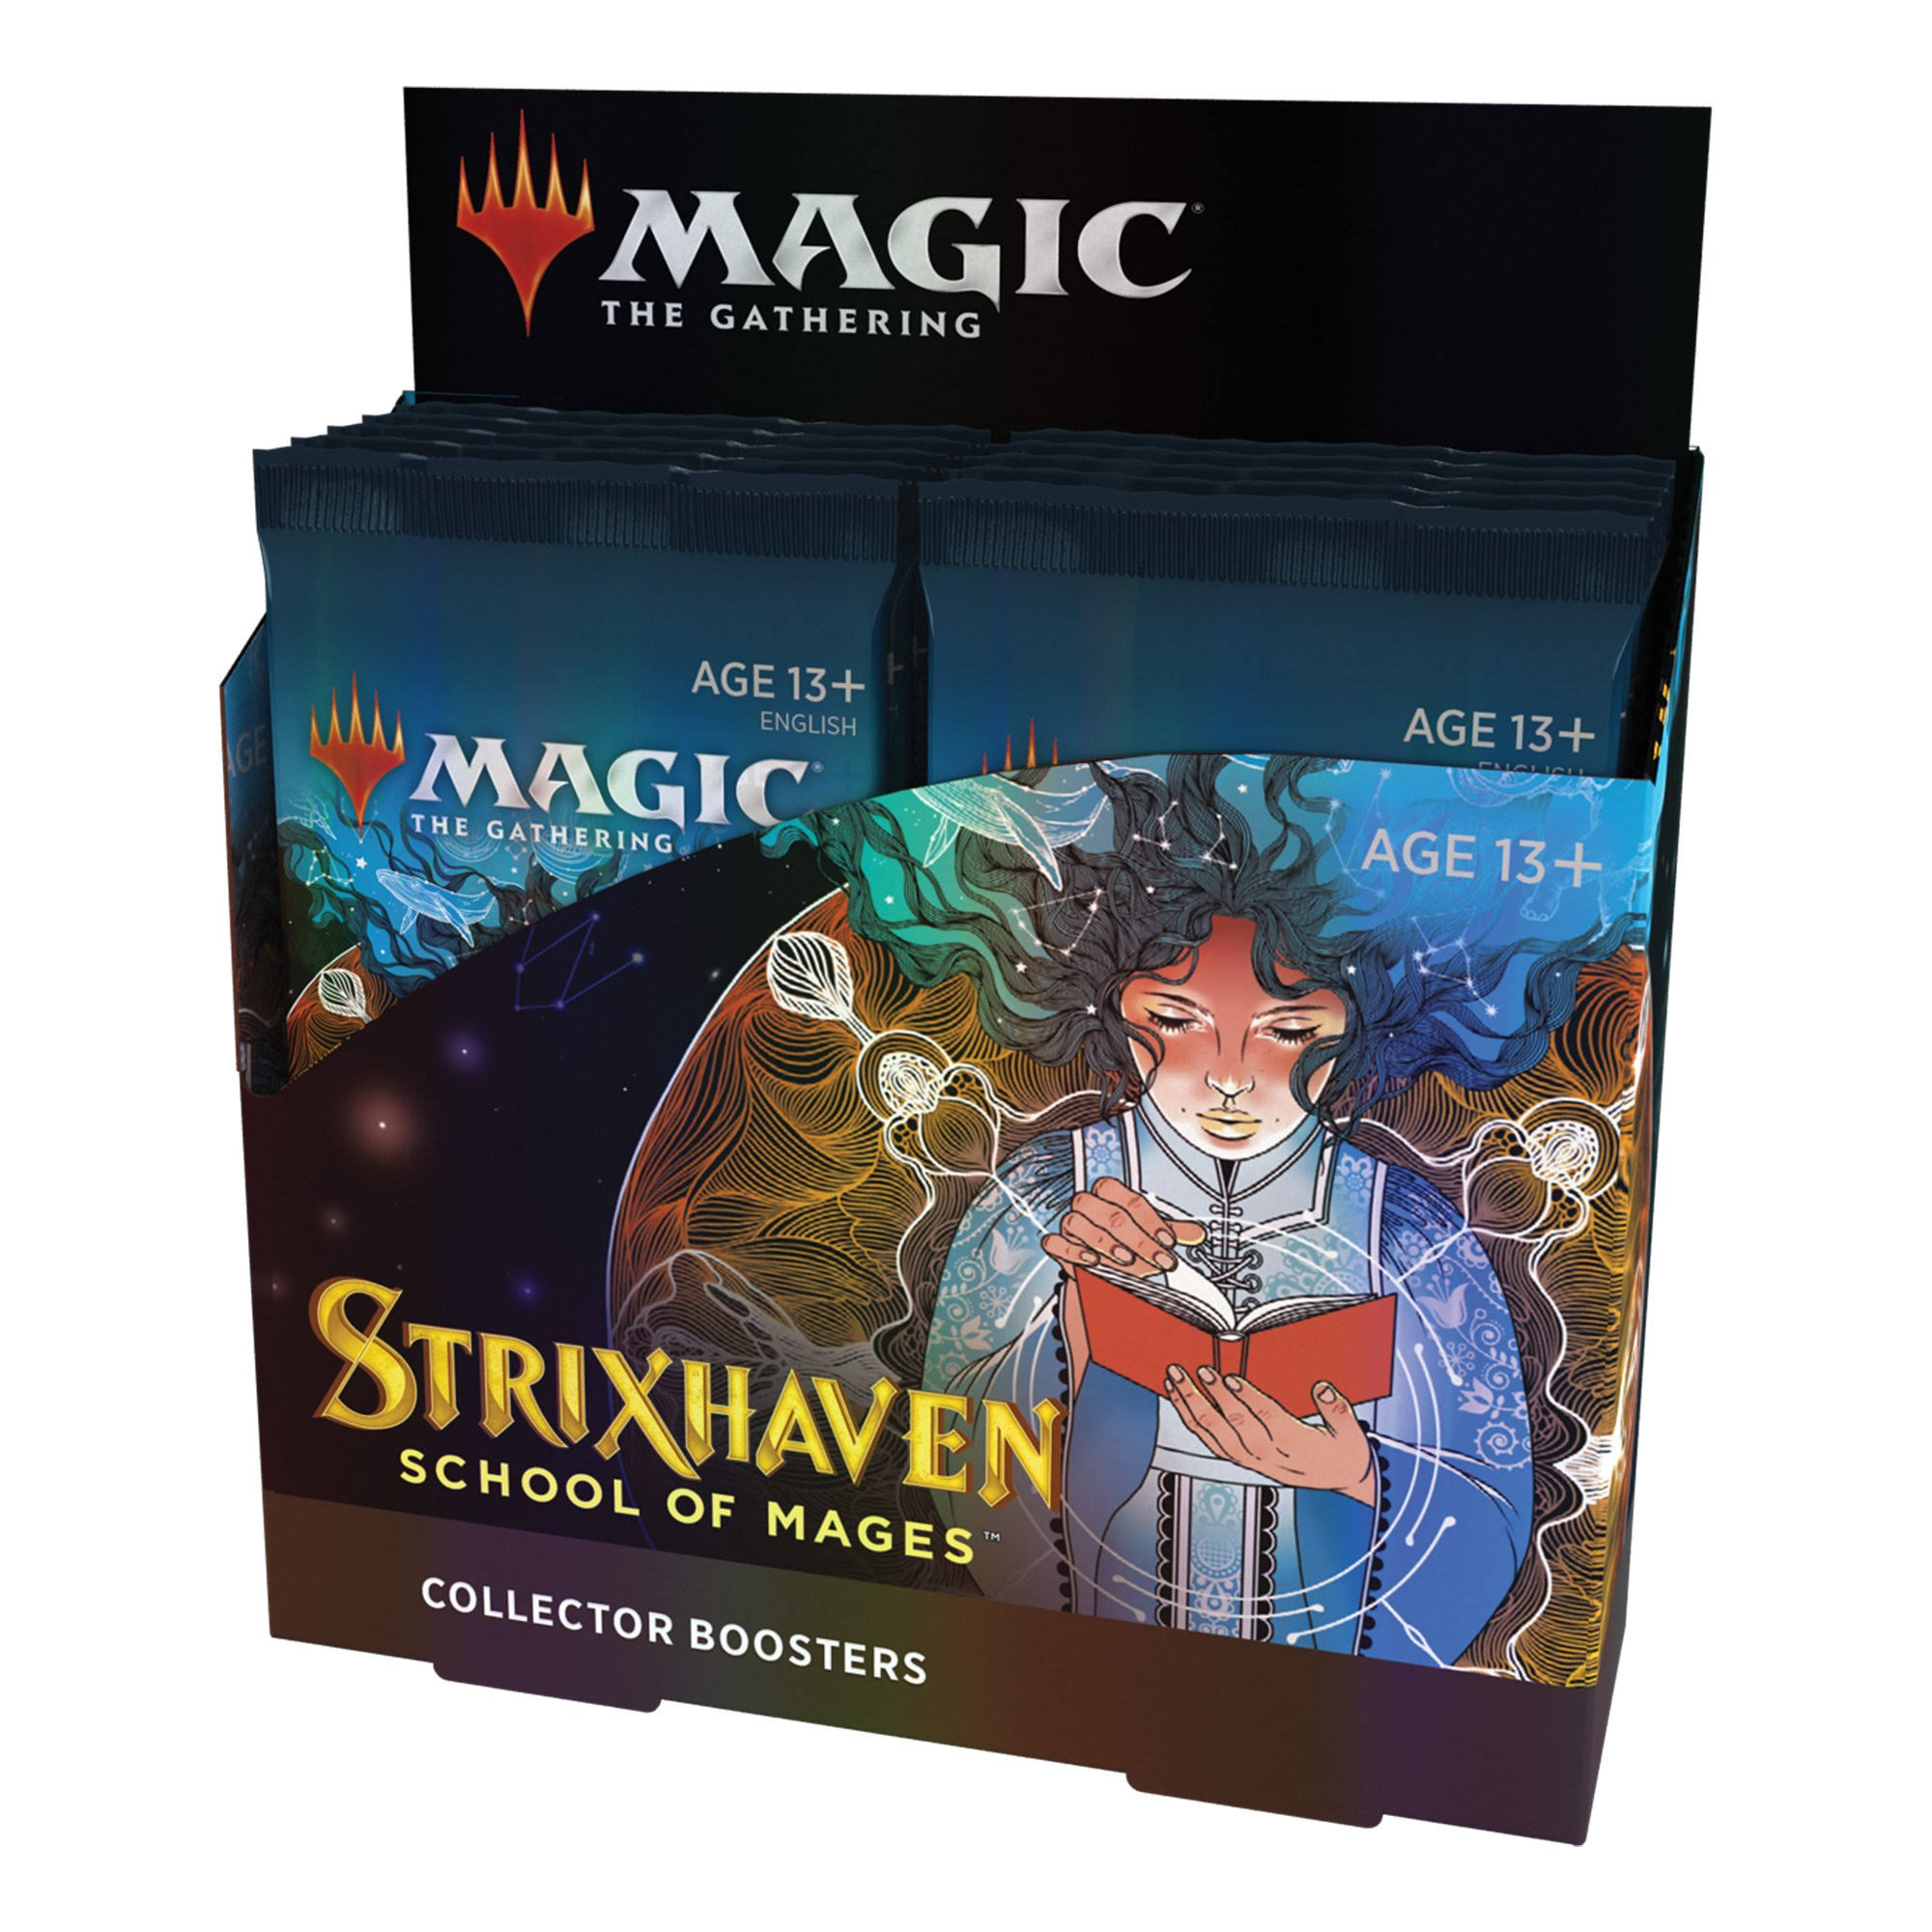 Magic The Gathering Strixhaven School of Mages Collector Booster Box